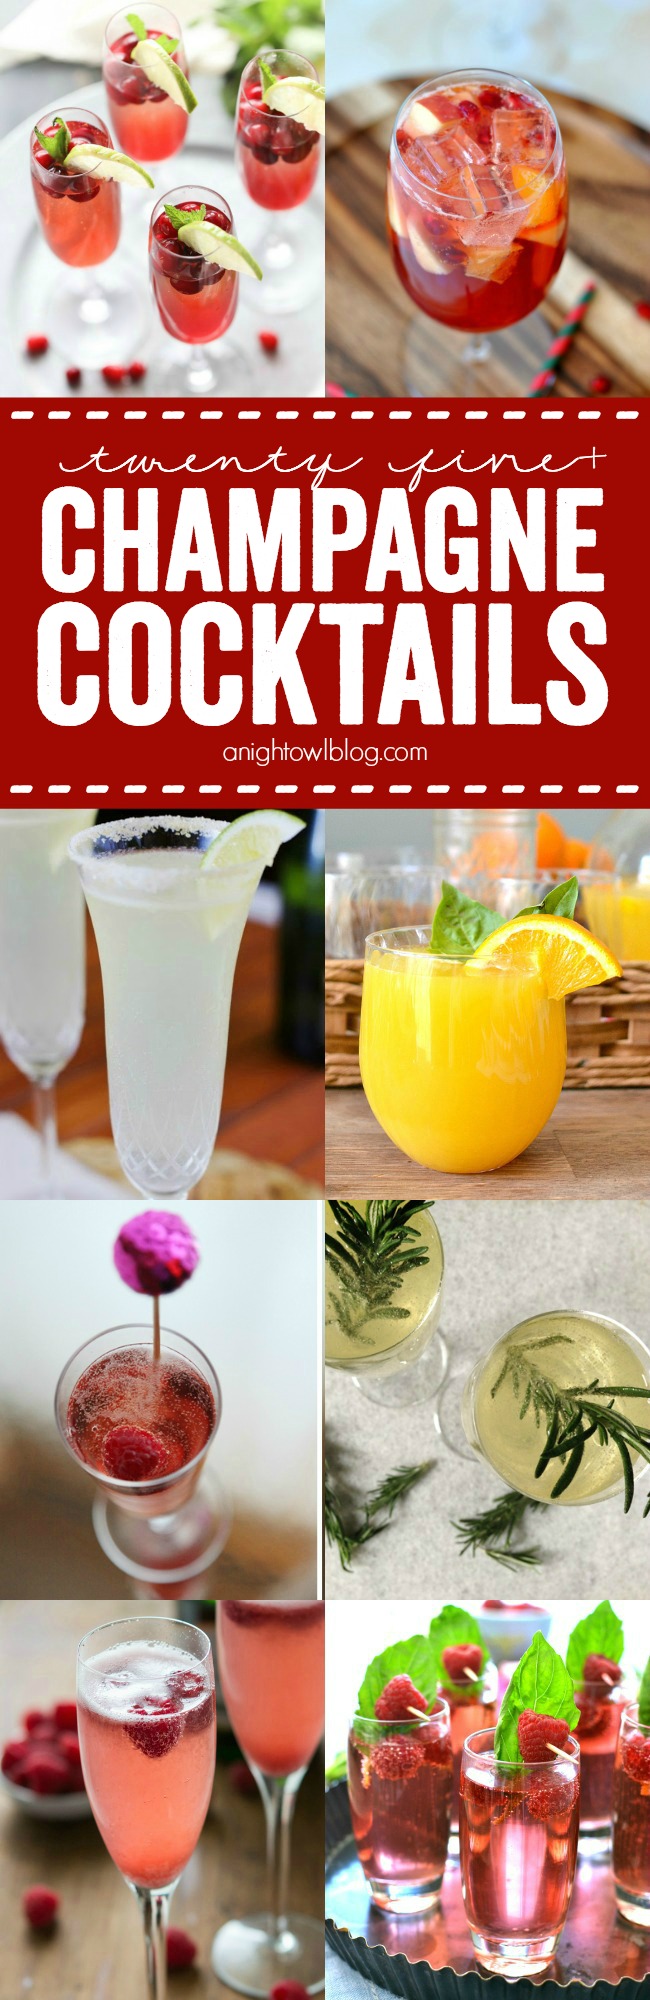 So many great Champagne Cocktails, perfect for New Years!